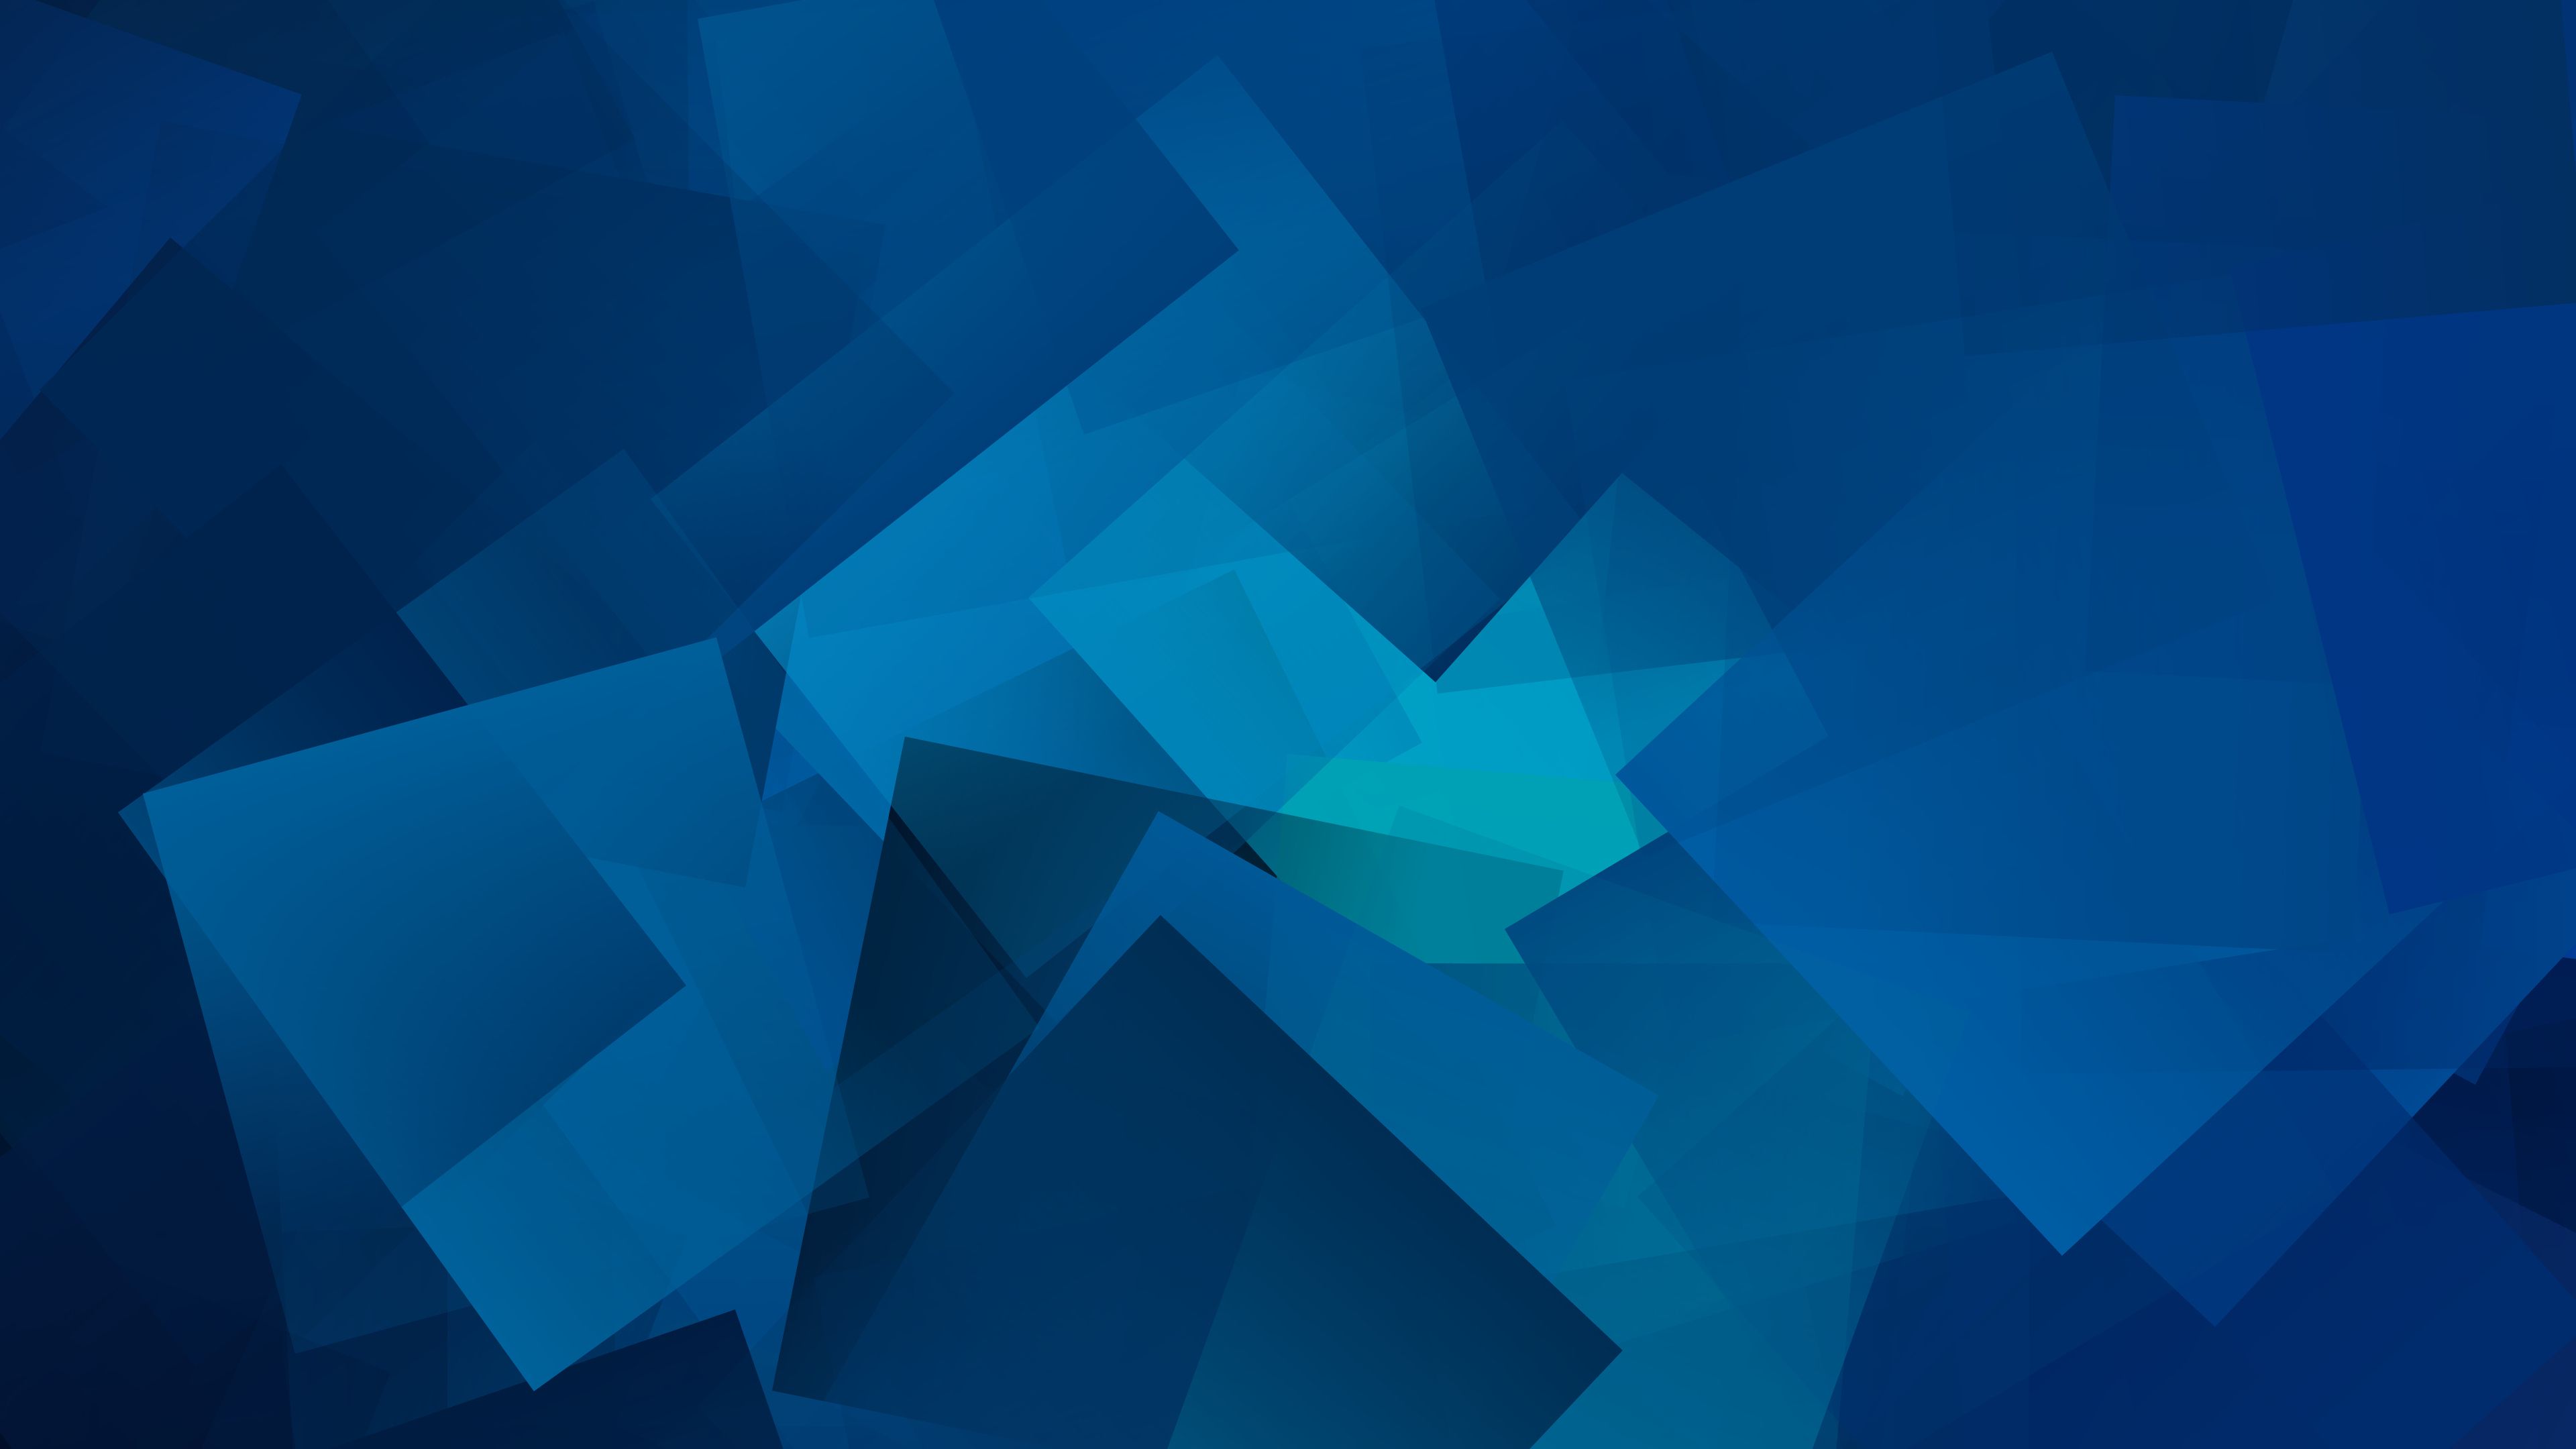 3D Geometric Abstract Wallpaper Free 3D Geometric Abstract Background